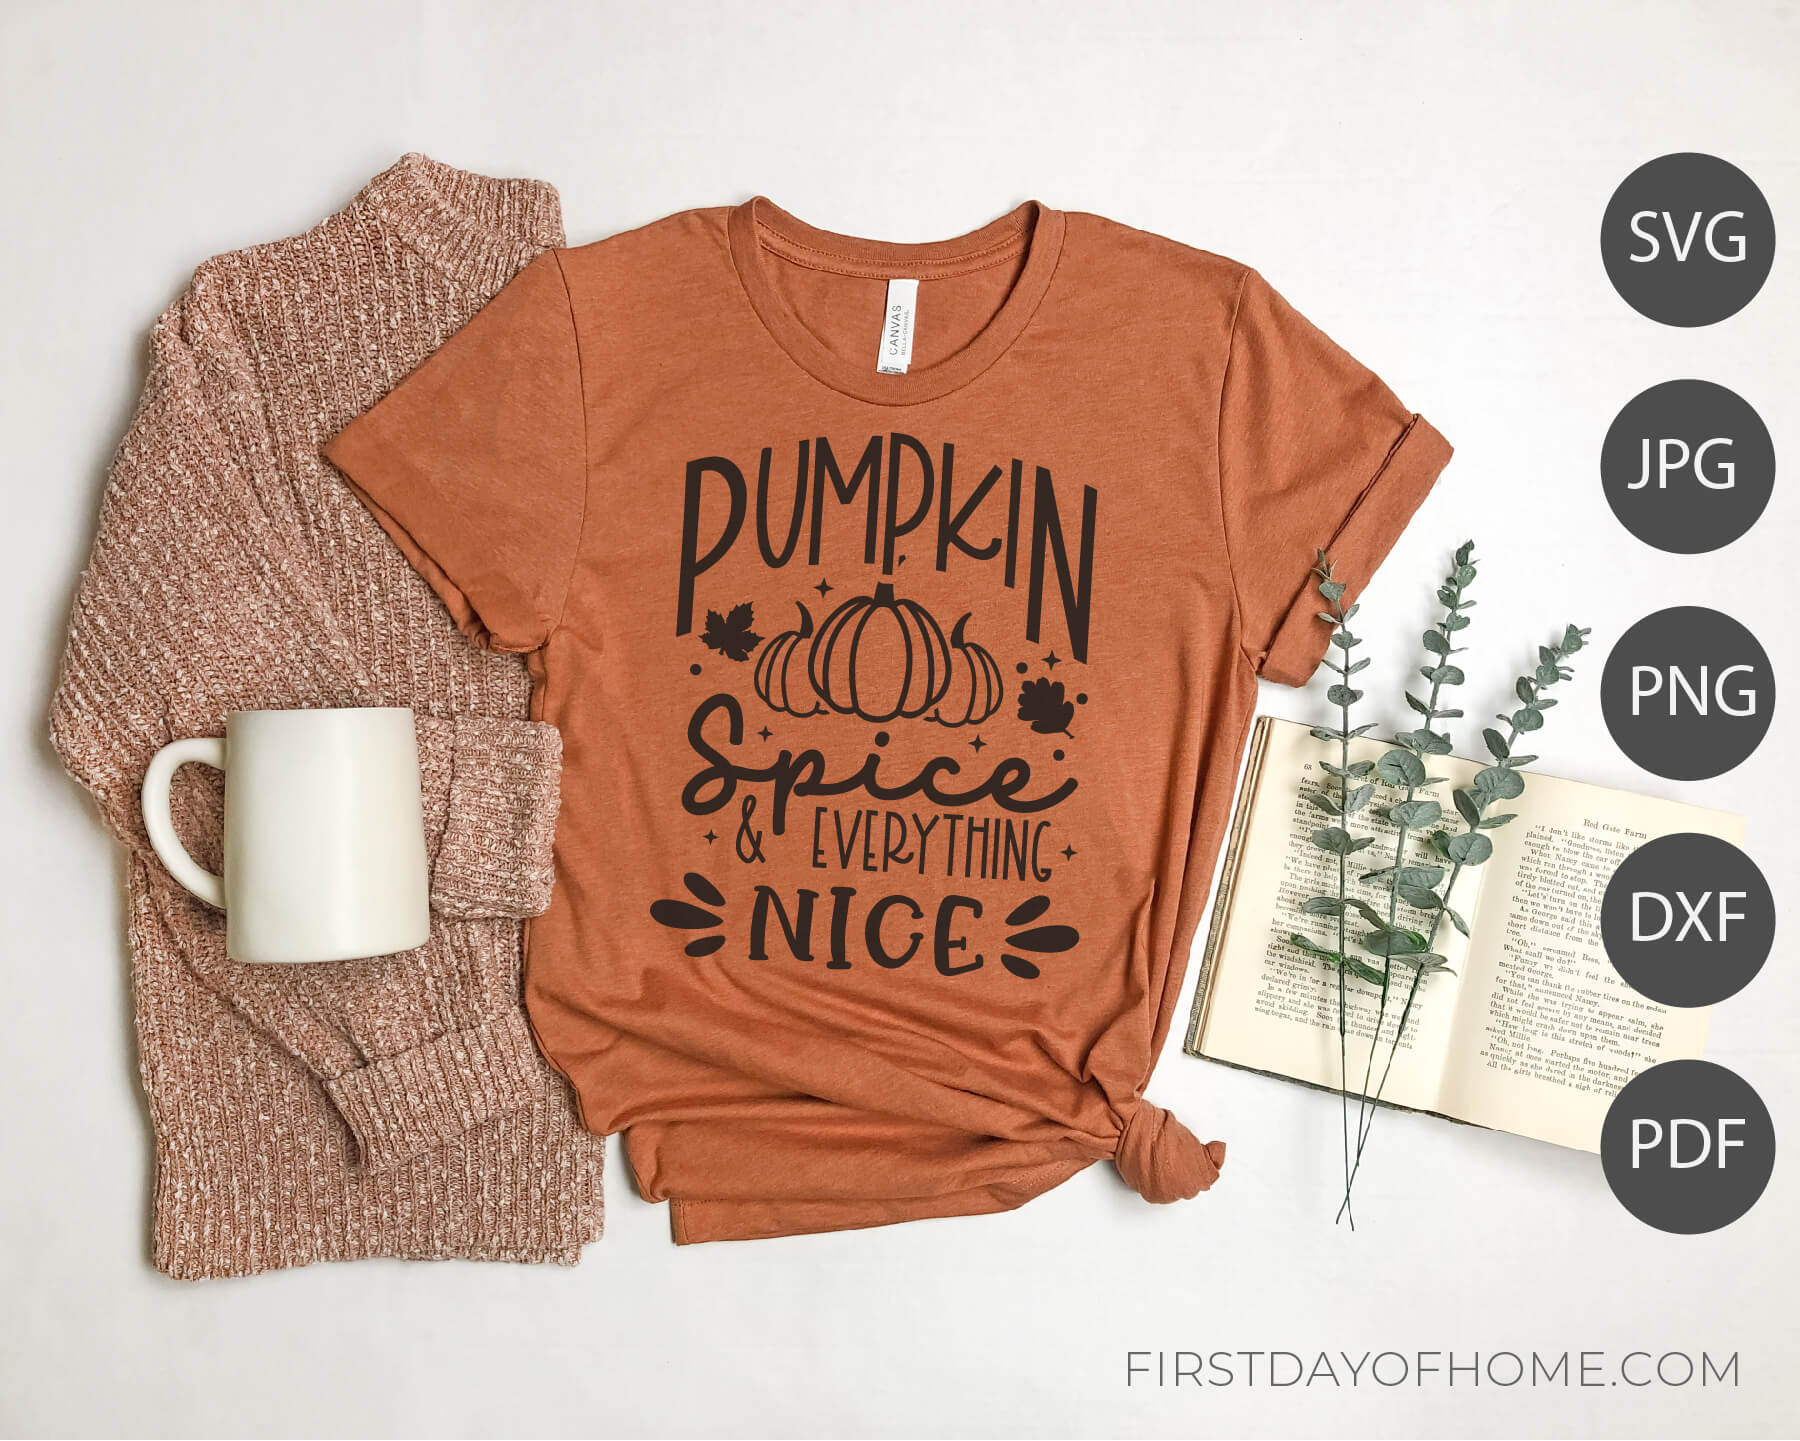 Mockup example of Pumpkin Spice and Everything Nice t-shirt using digital files. Lists digital files as SVG, JPG, PNG, DXF and PDF